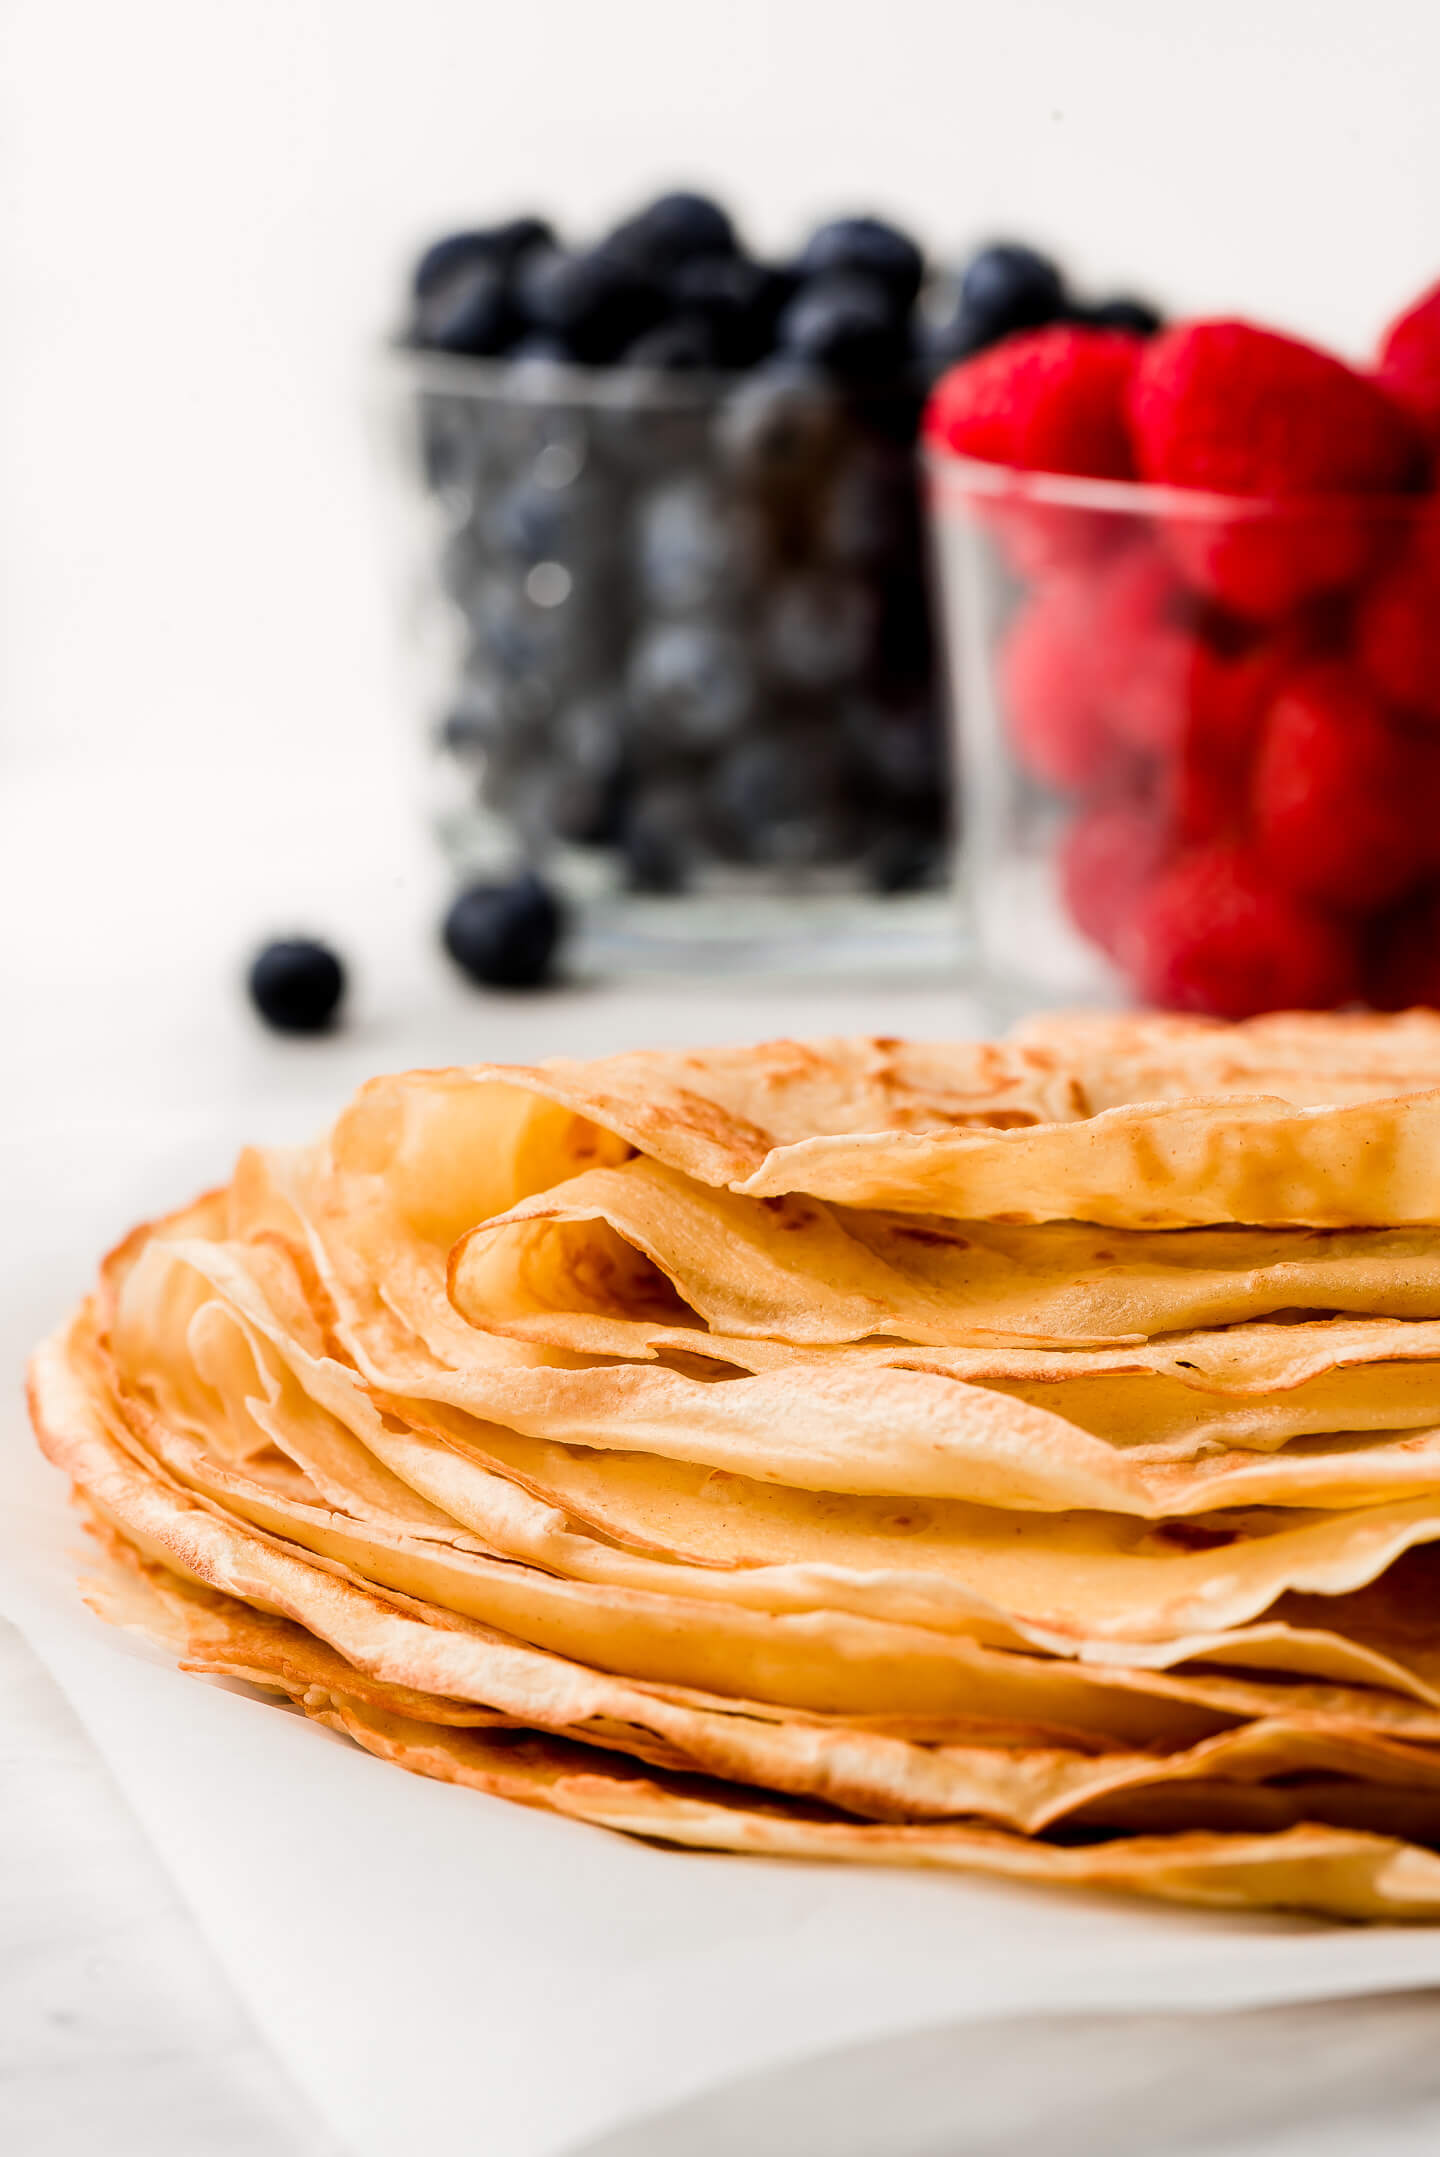 Crepes stacked on top of each other and bowls of berries.